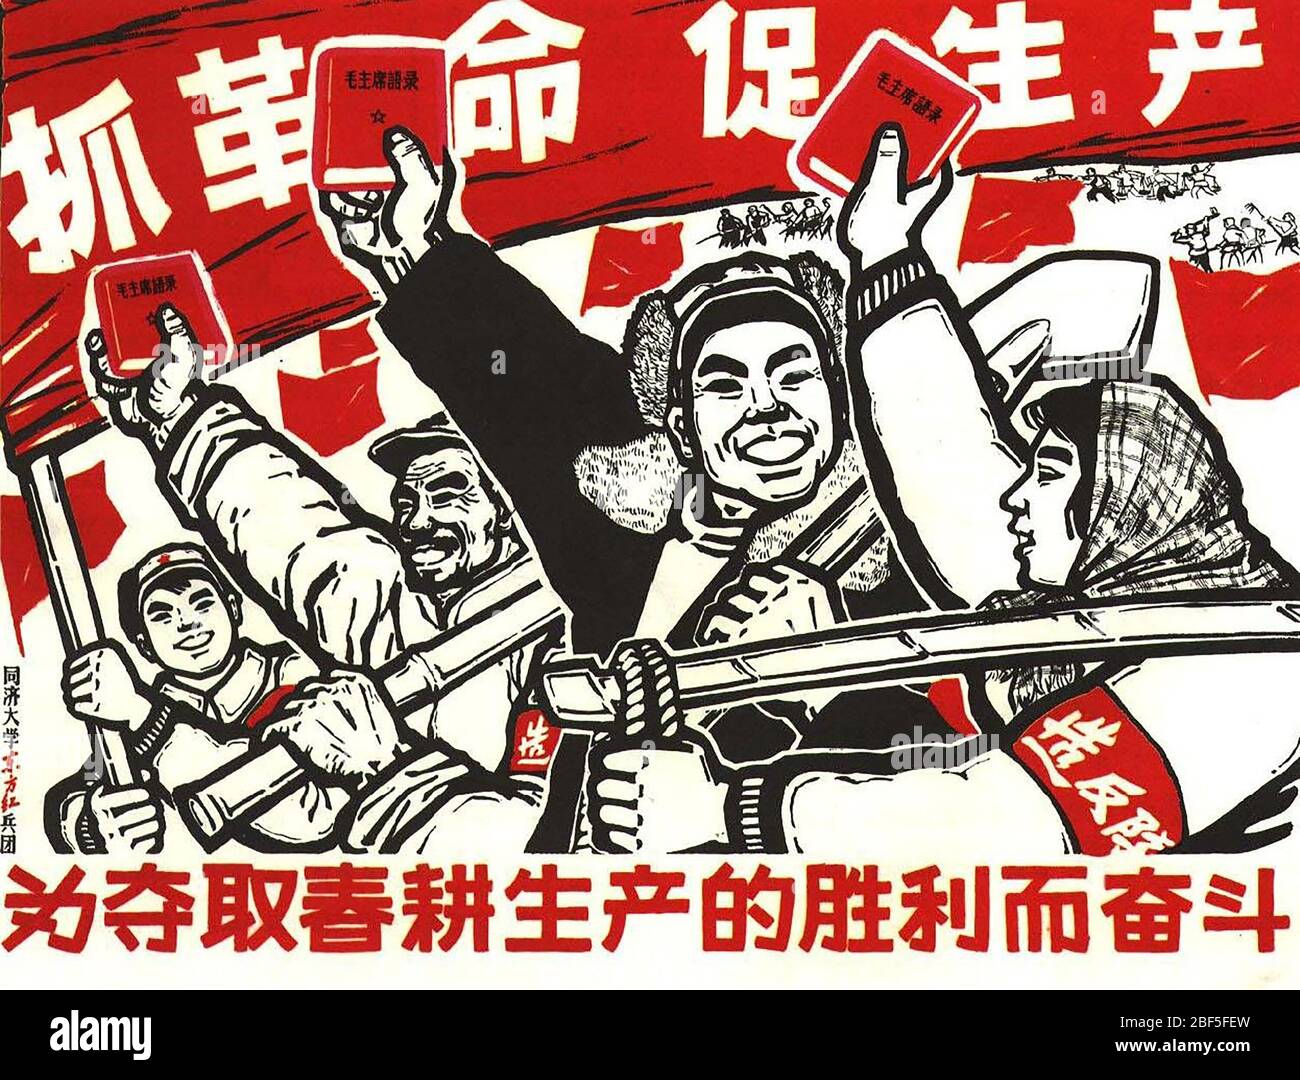 QUOTATIONS FROM CHAIRMAN MAO - the Little Red Book. A 1964 Chinese Communist Party poster advertising the book by Mao Tse-Tung. Stock Photo